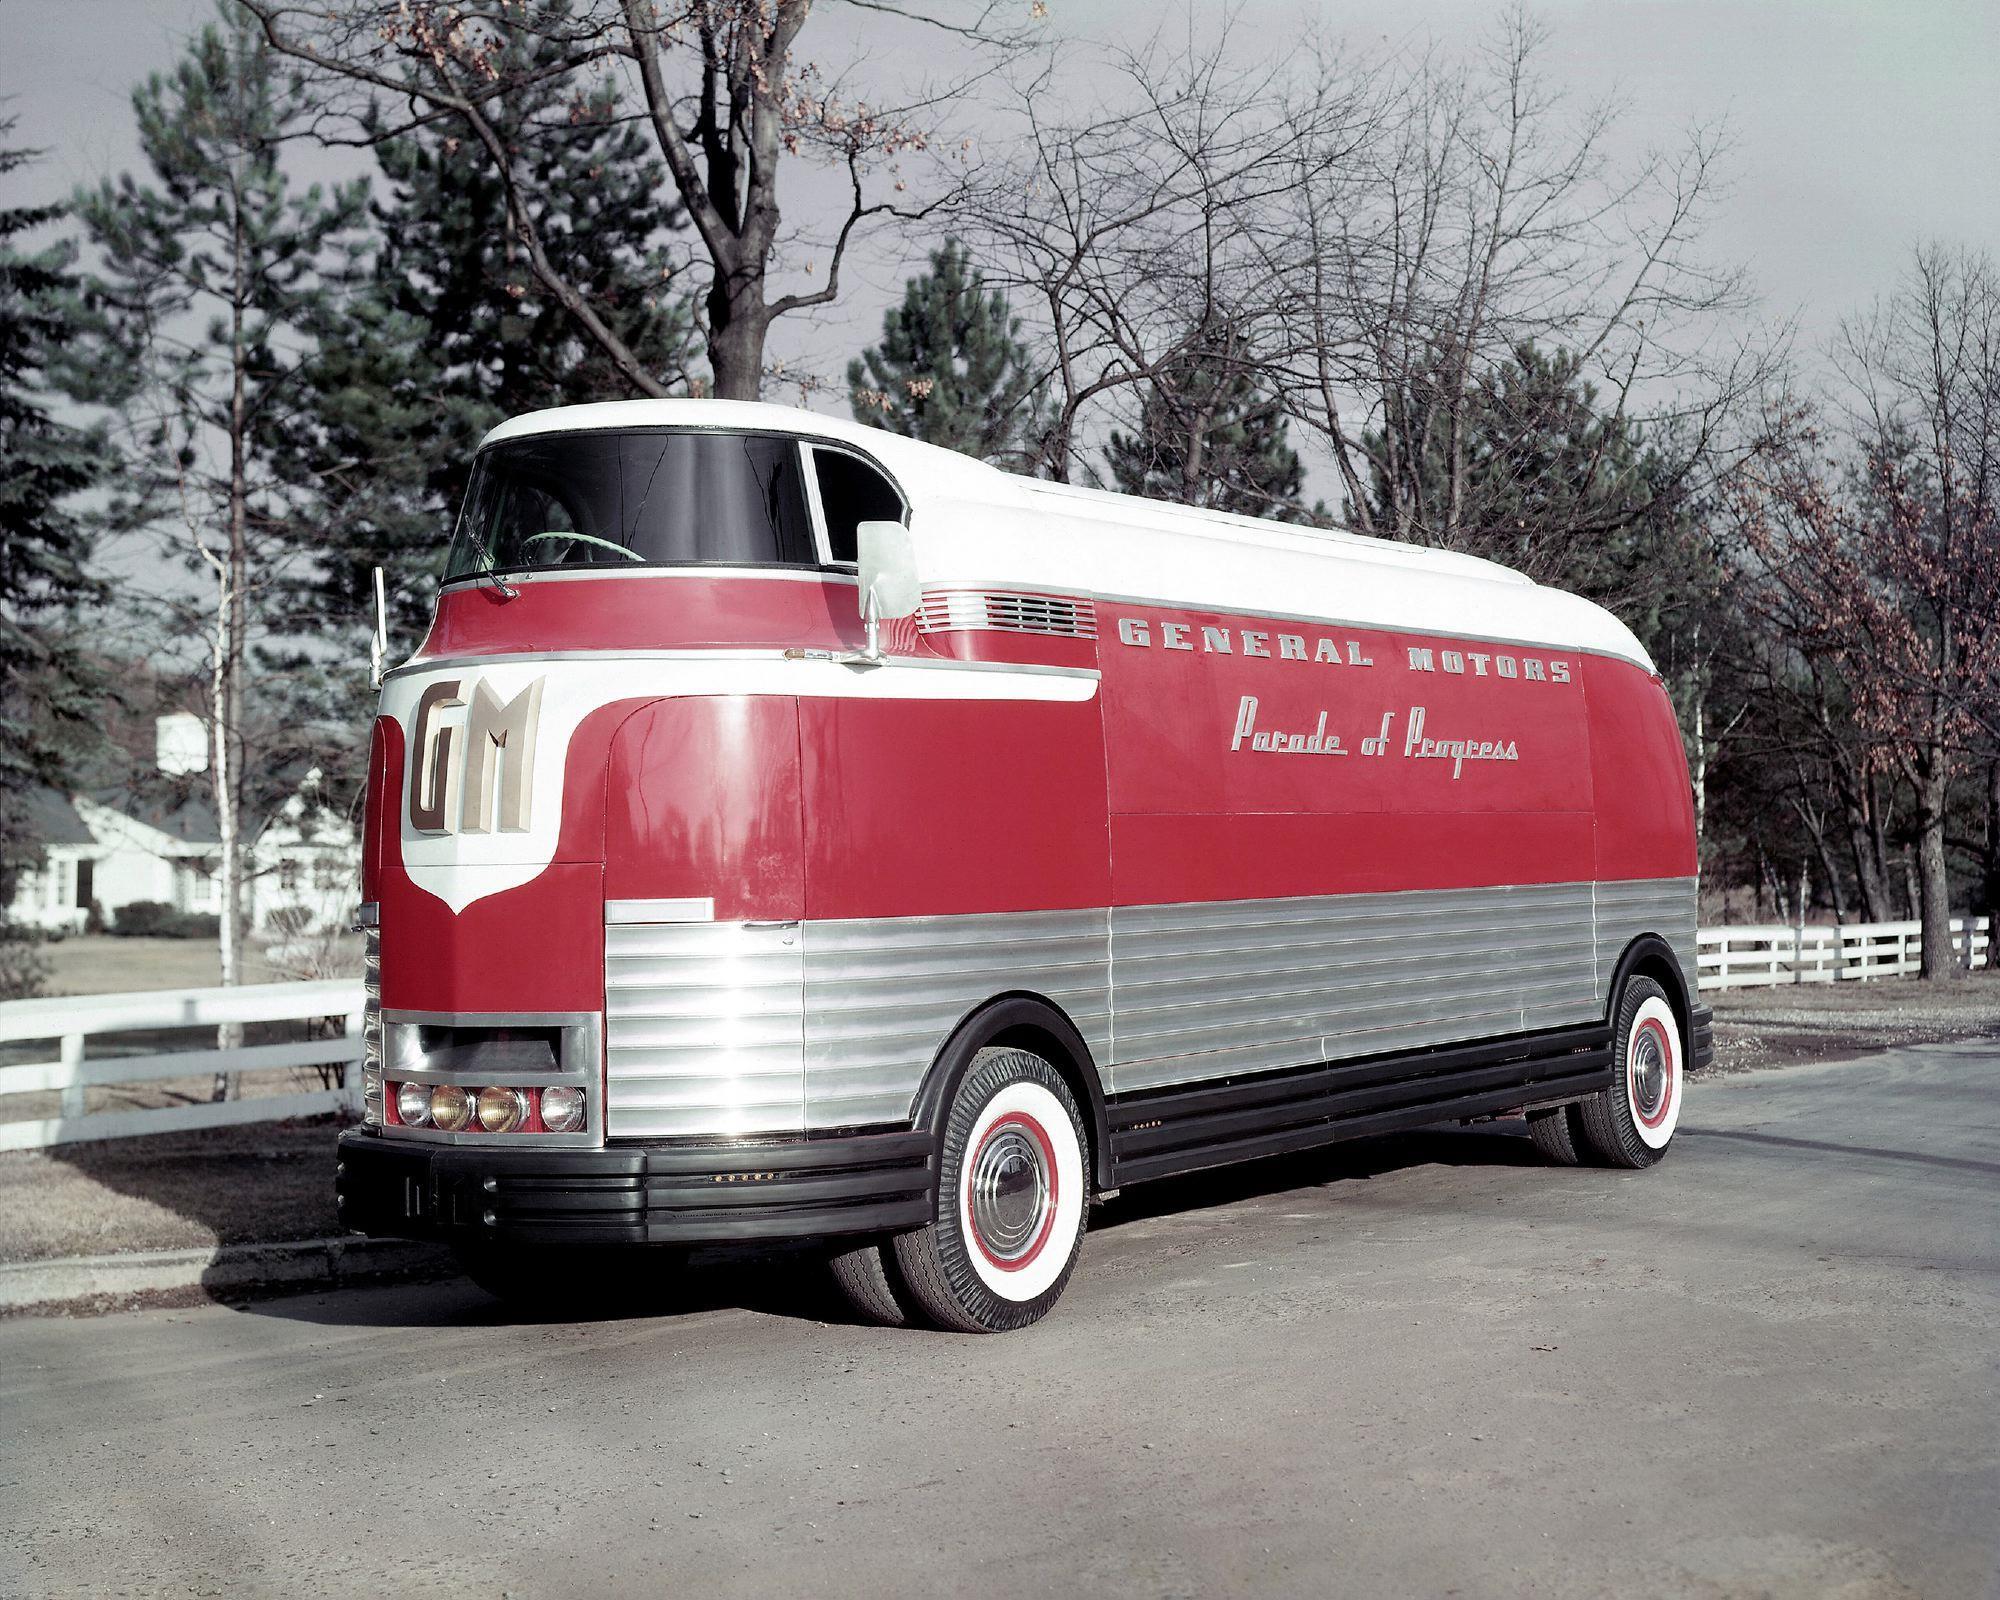 Concept Car Of The Week Gm Futurliner 1939 Article